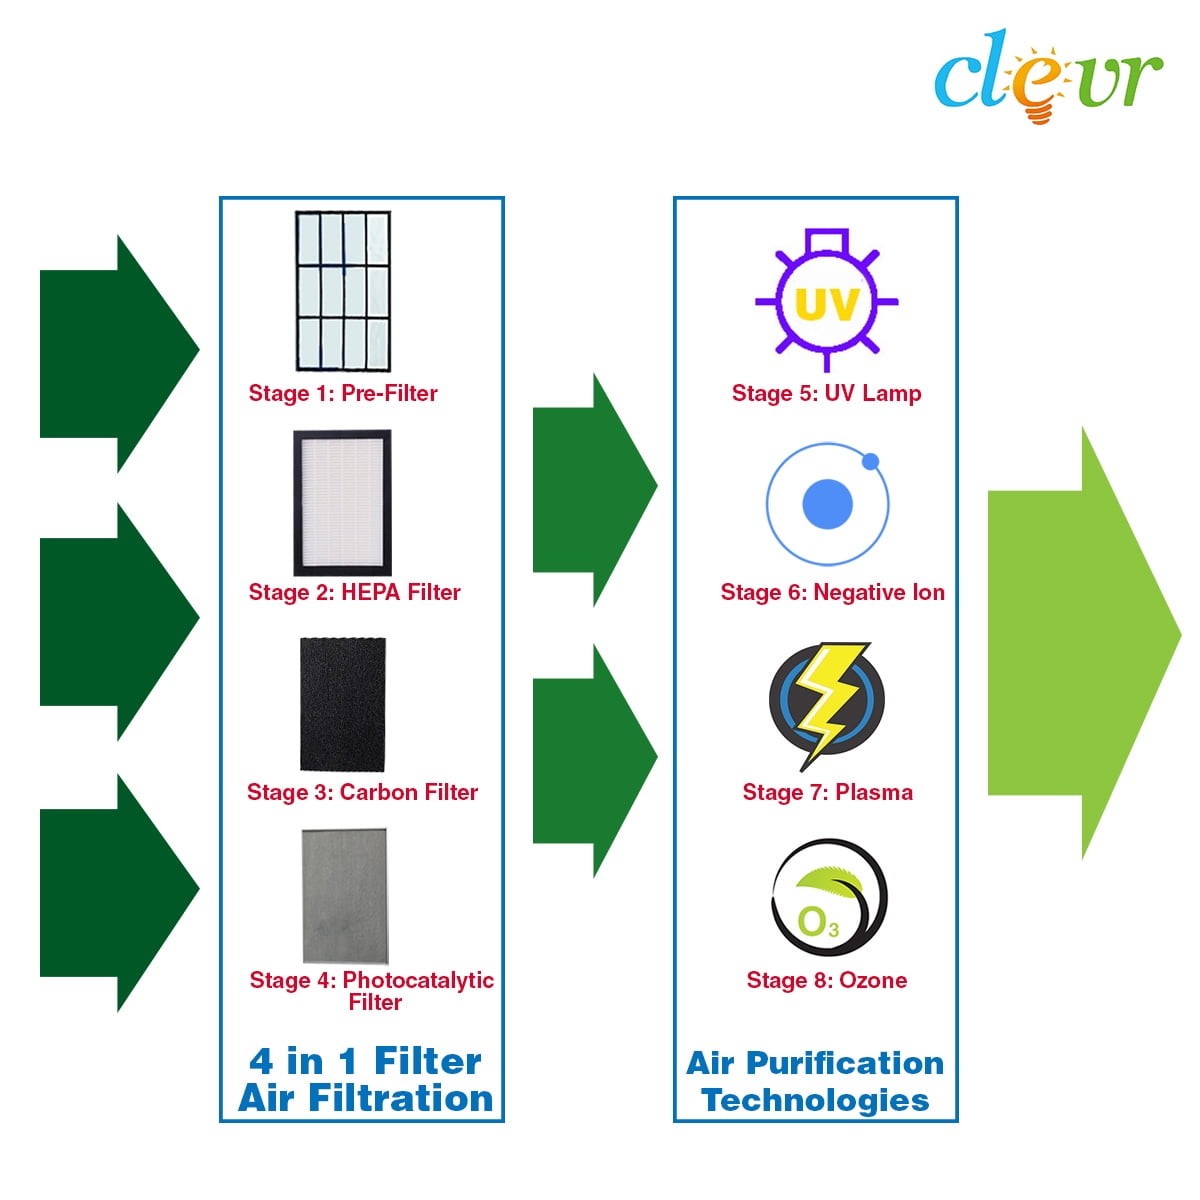 Clevr 8 Stage Wood Housing Generator Air Purifier, Filter, Ozone, Ionic, UV, Plasma, 1000 Sq ft Coverage - Walmart.com